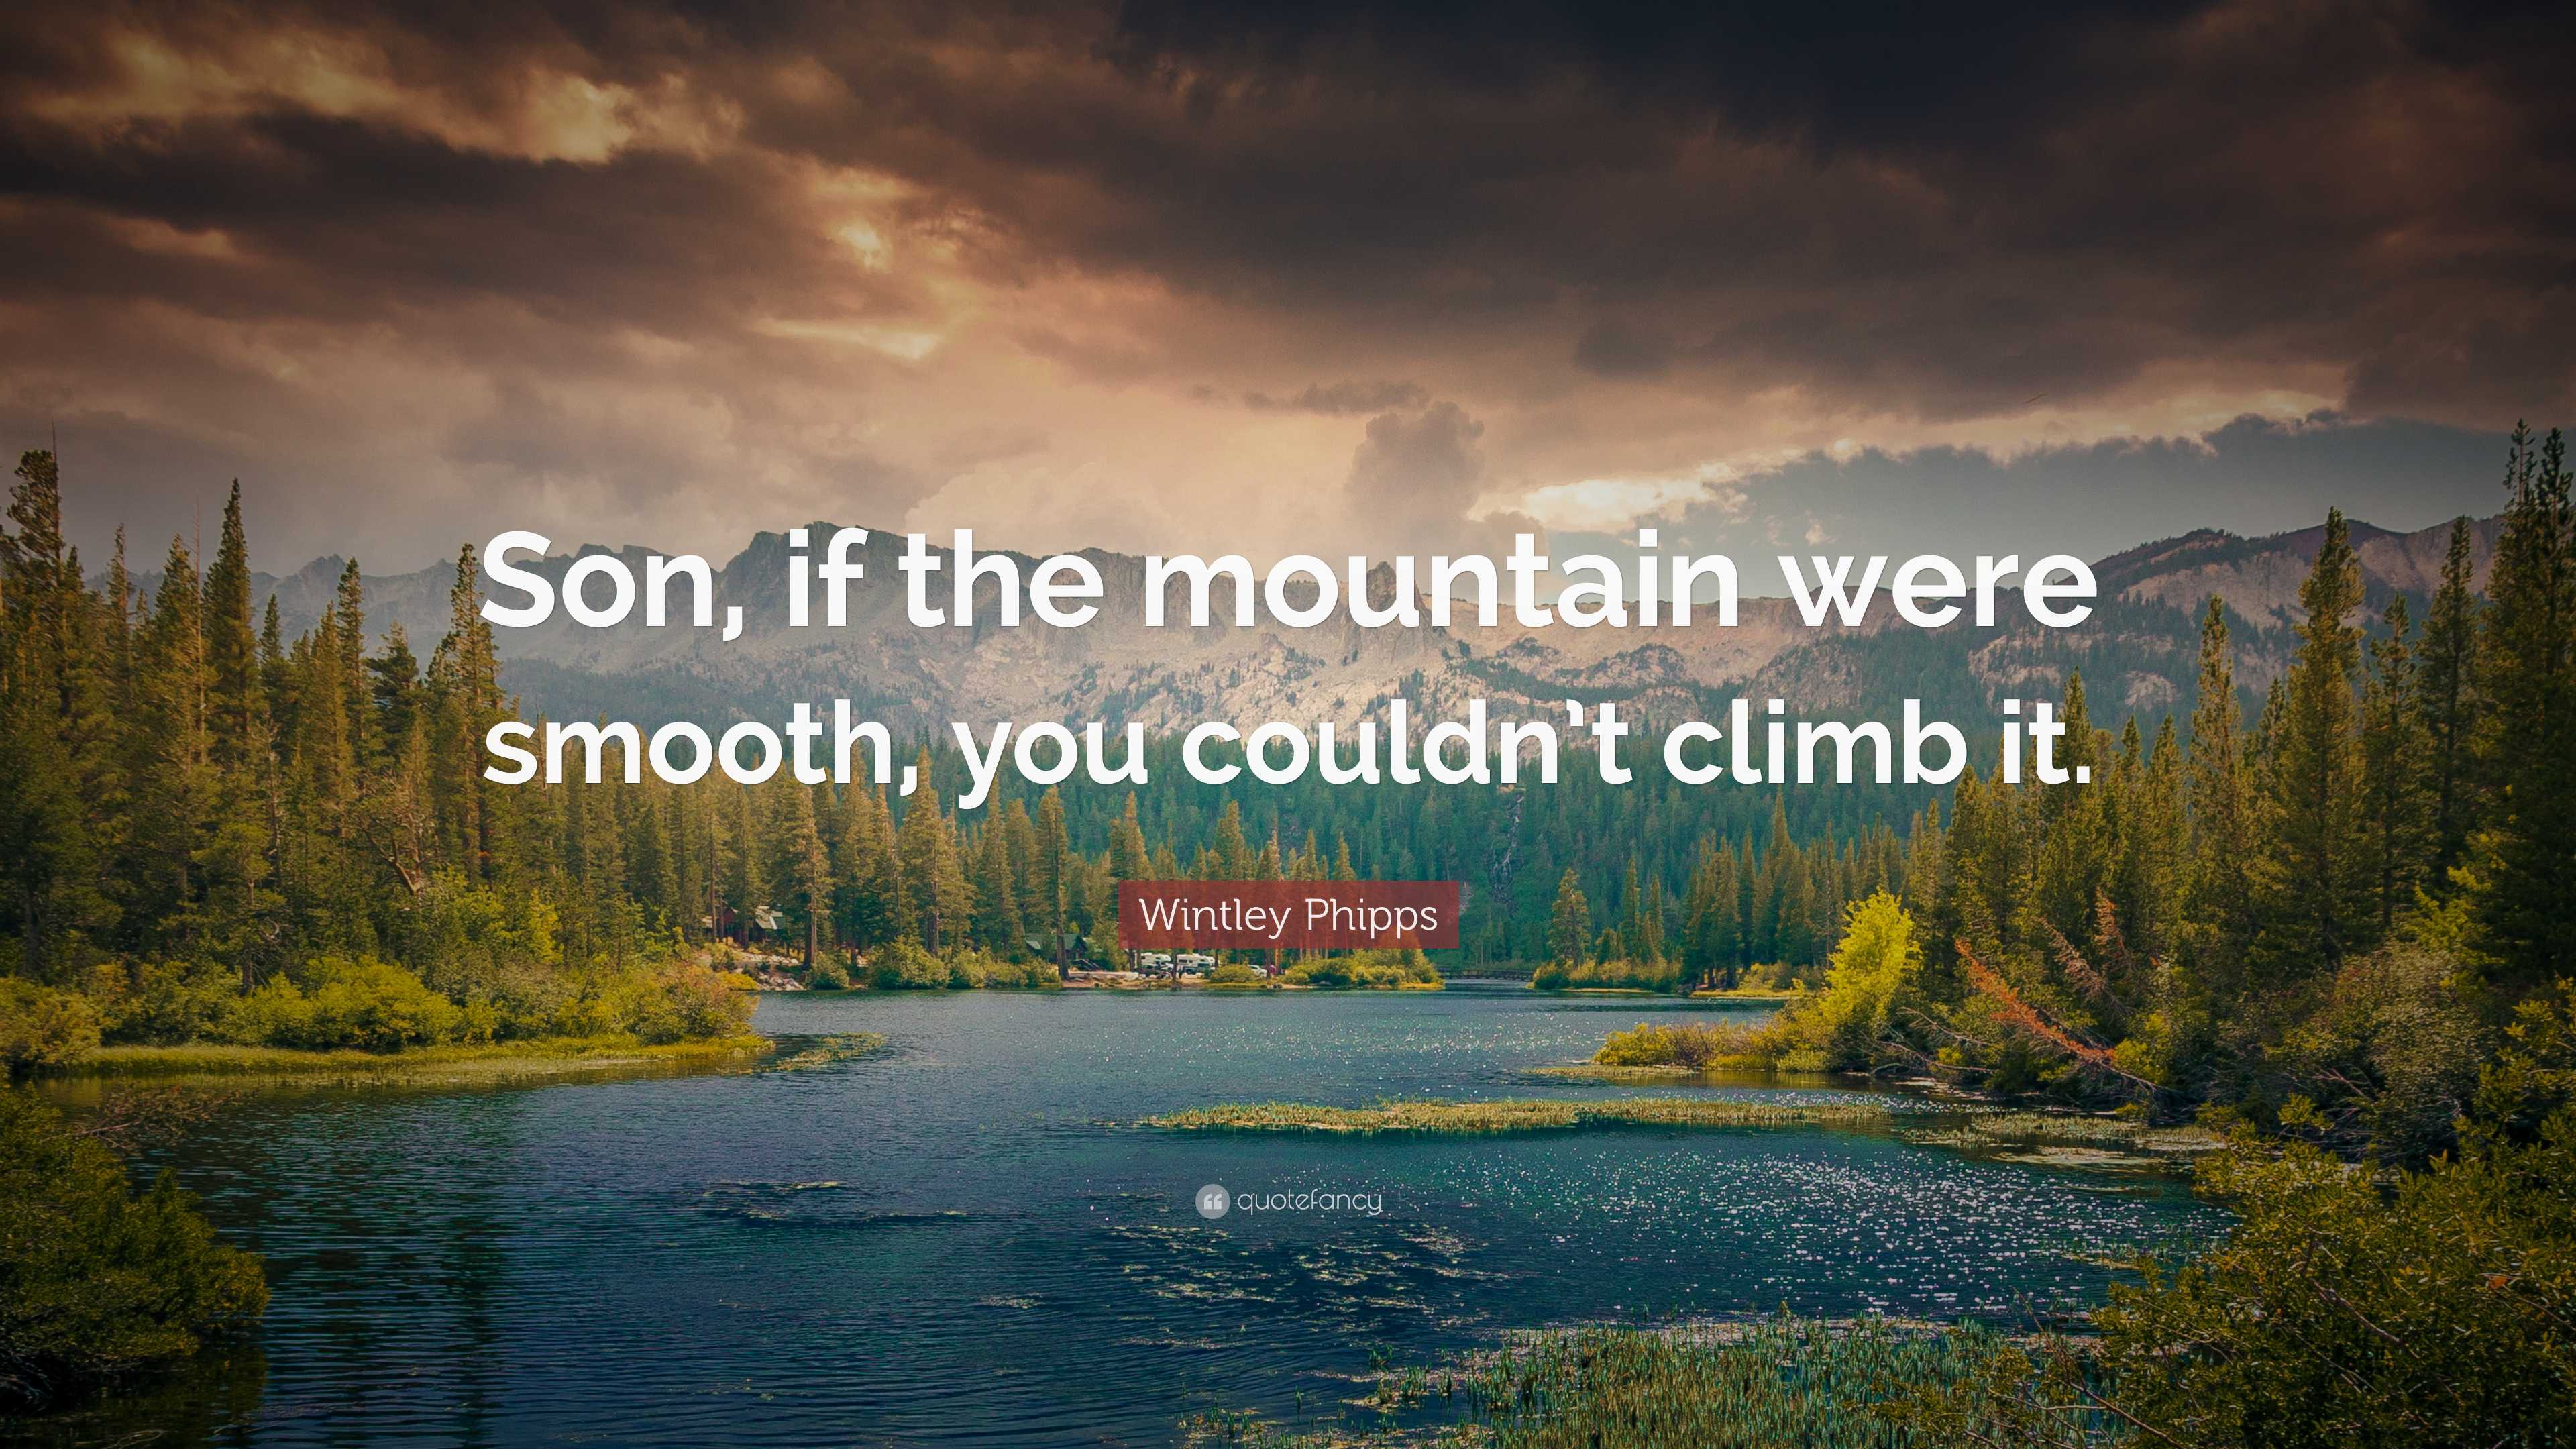 Wintley Phipps Quote: “Son, if the mountain were smooth, you couldn't climb  it.”